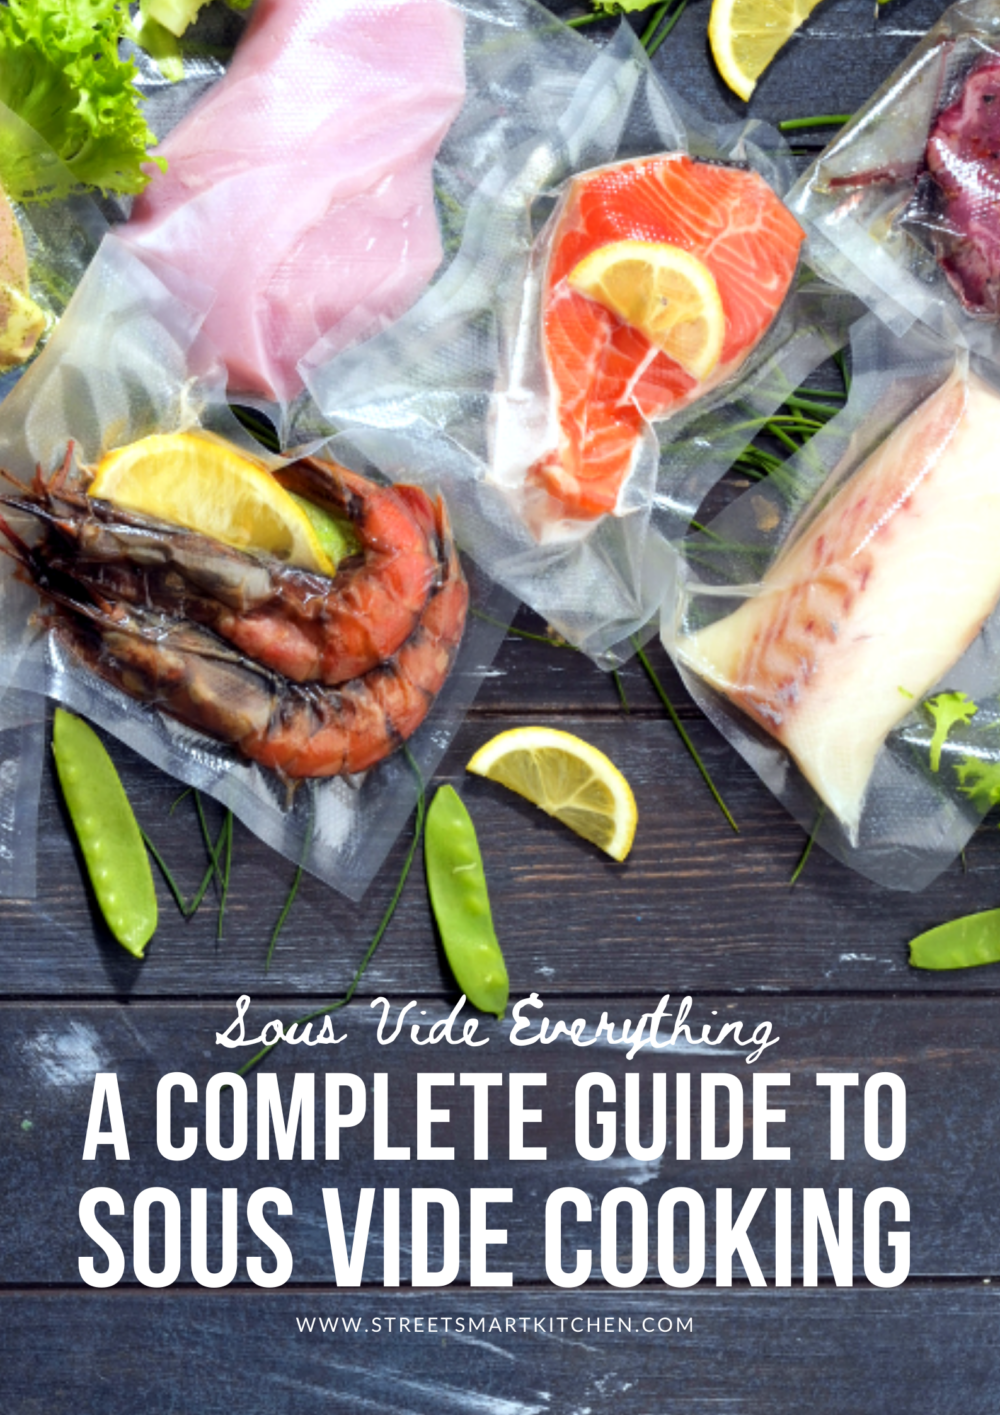 https://www.streetsmartkitchen.com/wp-content/uploads/Sous-Vide-Everything-poster-e1614826292138.png